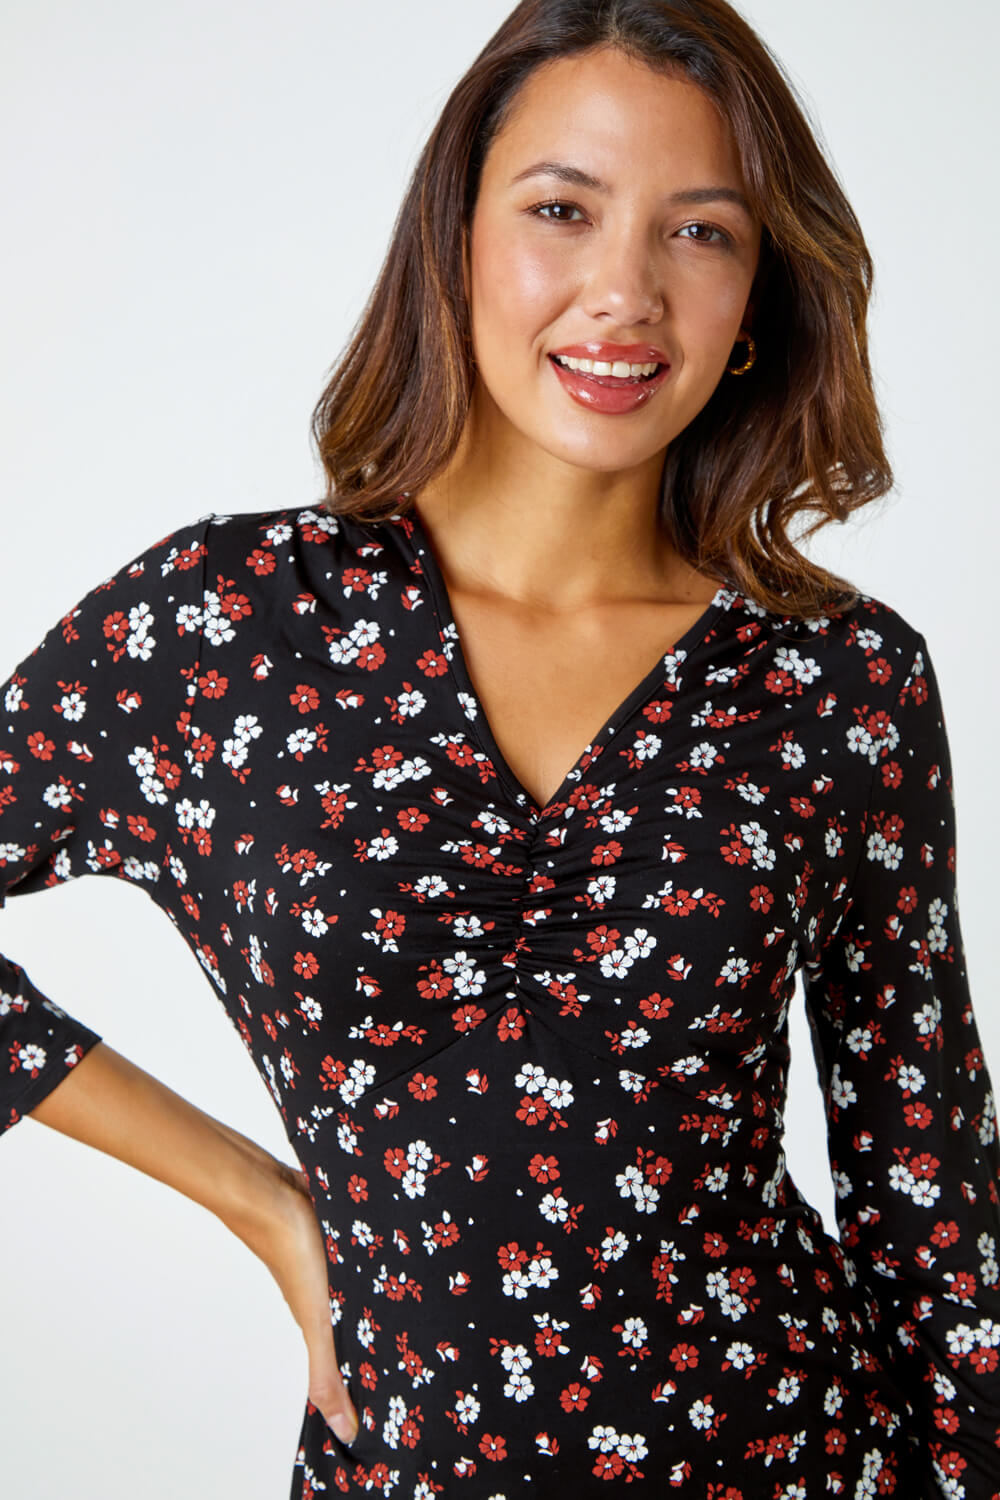 Rust Floral Print Ruched Stretch Top, Image 4 of 5